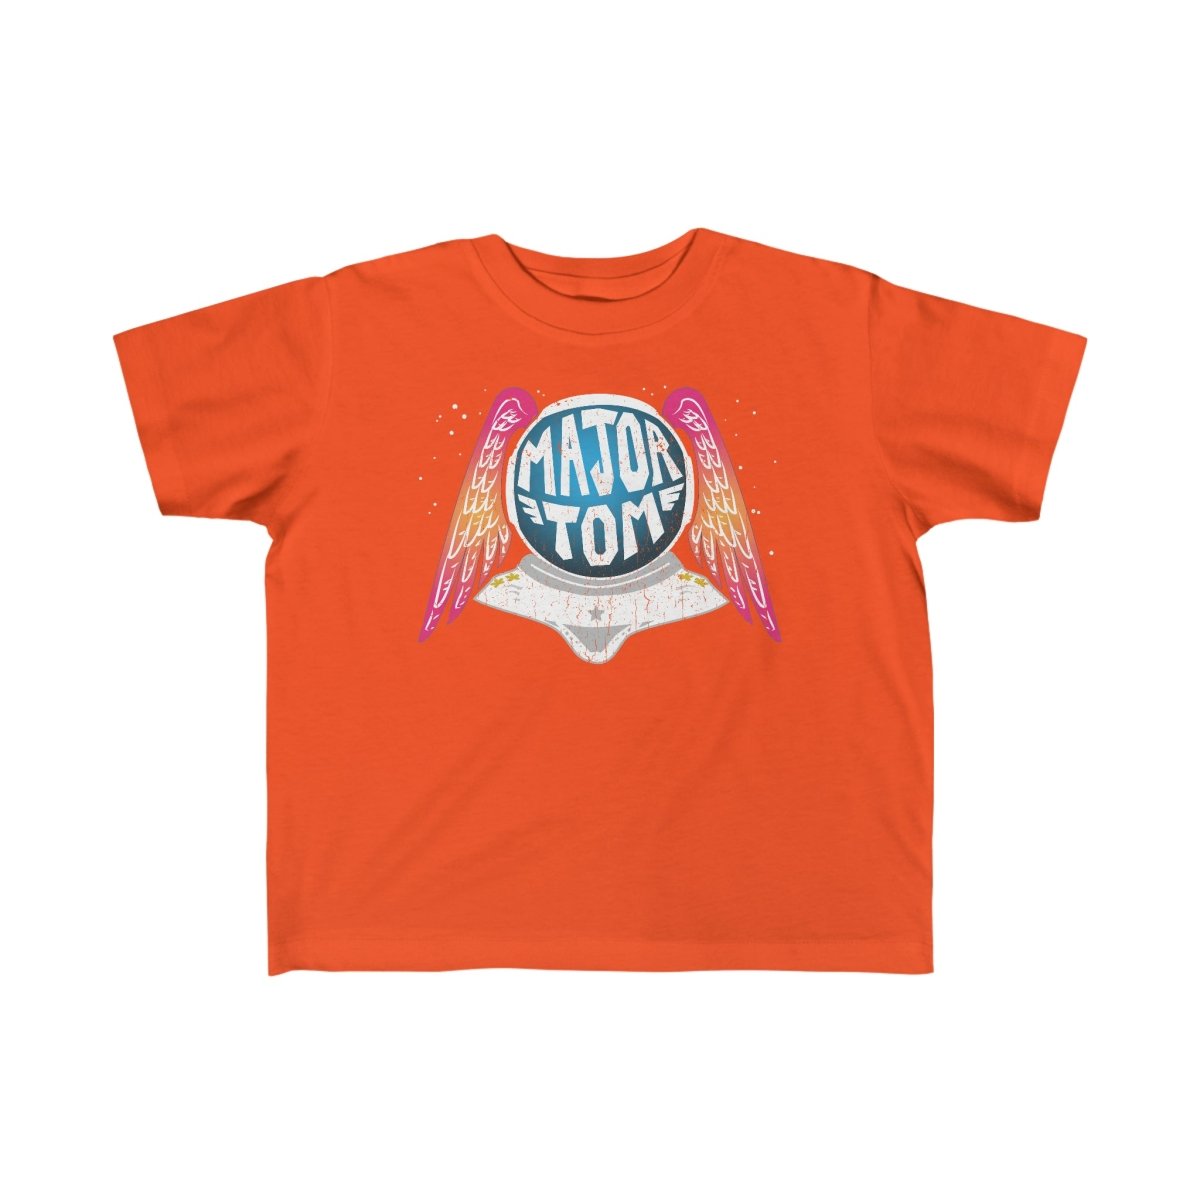 Major Tom Toddler T-Shirt, Star Child, Dreamer, Space Cadet, Outer Space, Astronaut